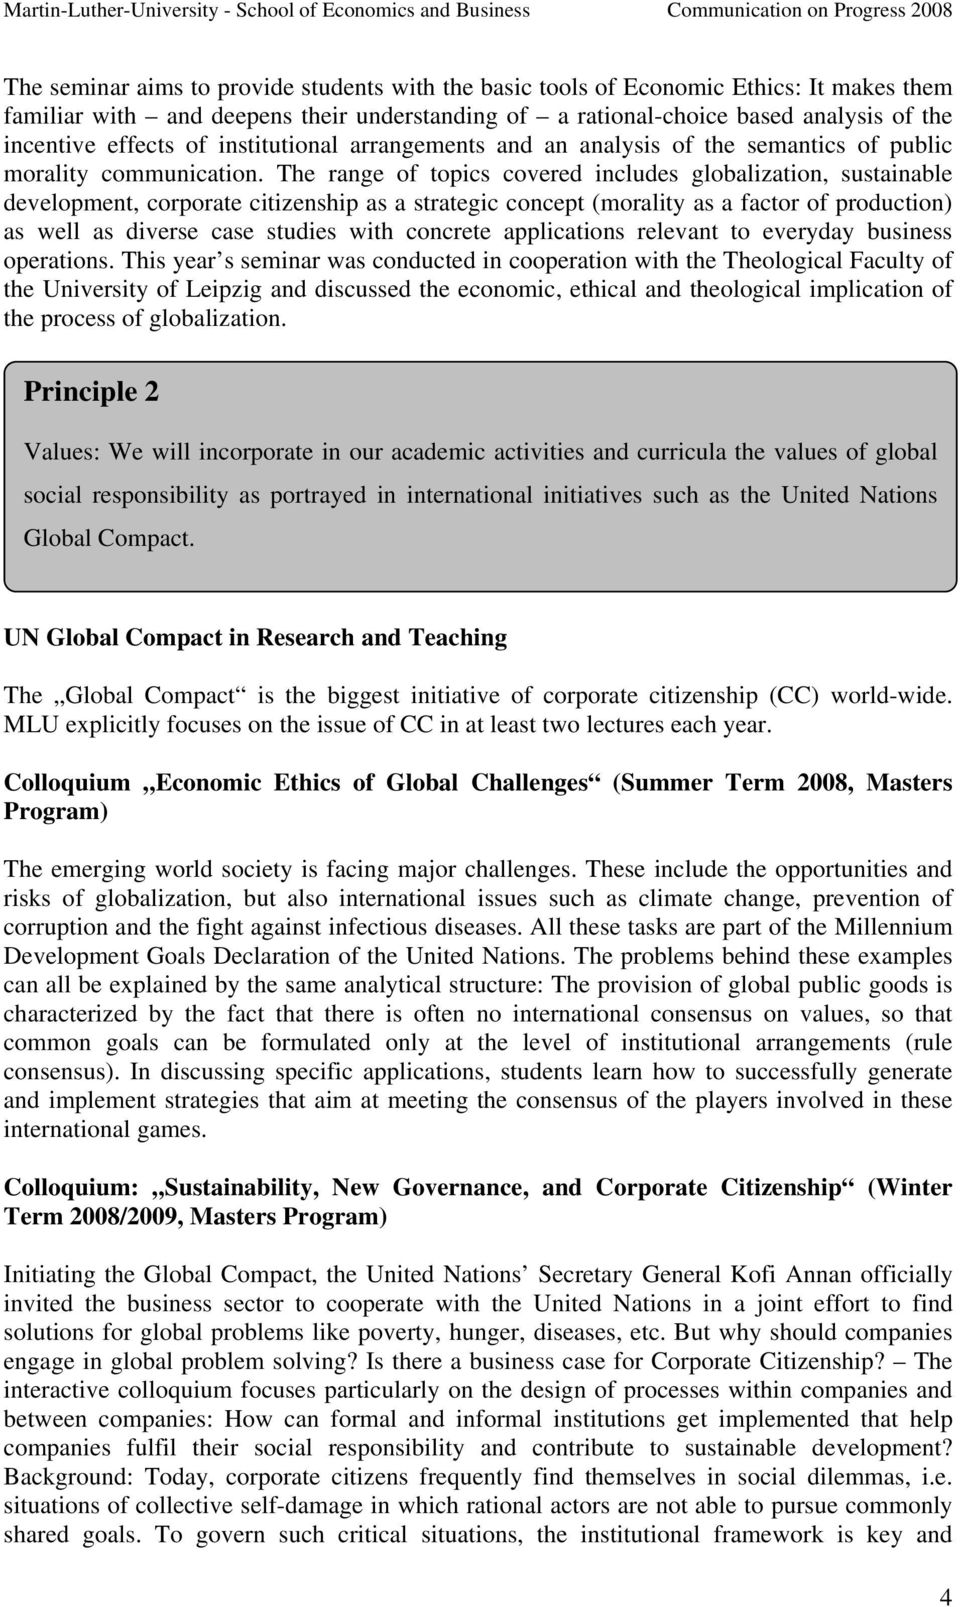 The range of topics covered includes globalization, sustainable development, corporate citizenship as a strategic concept (morality as a factor of production) as well as diverse case studies with